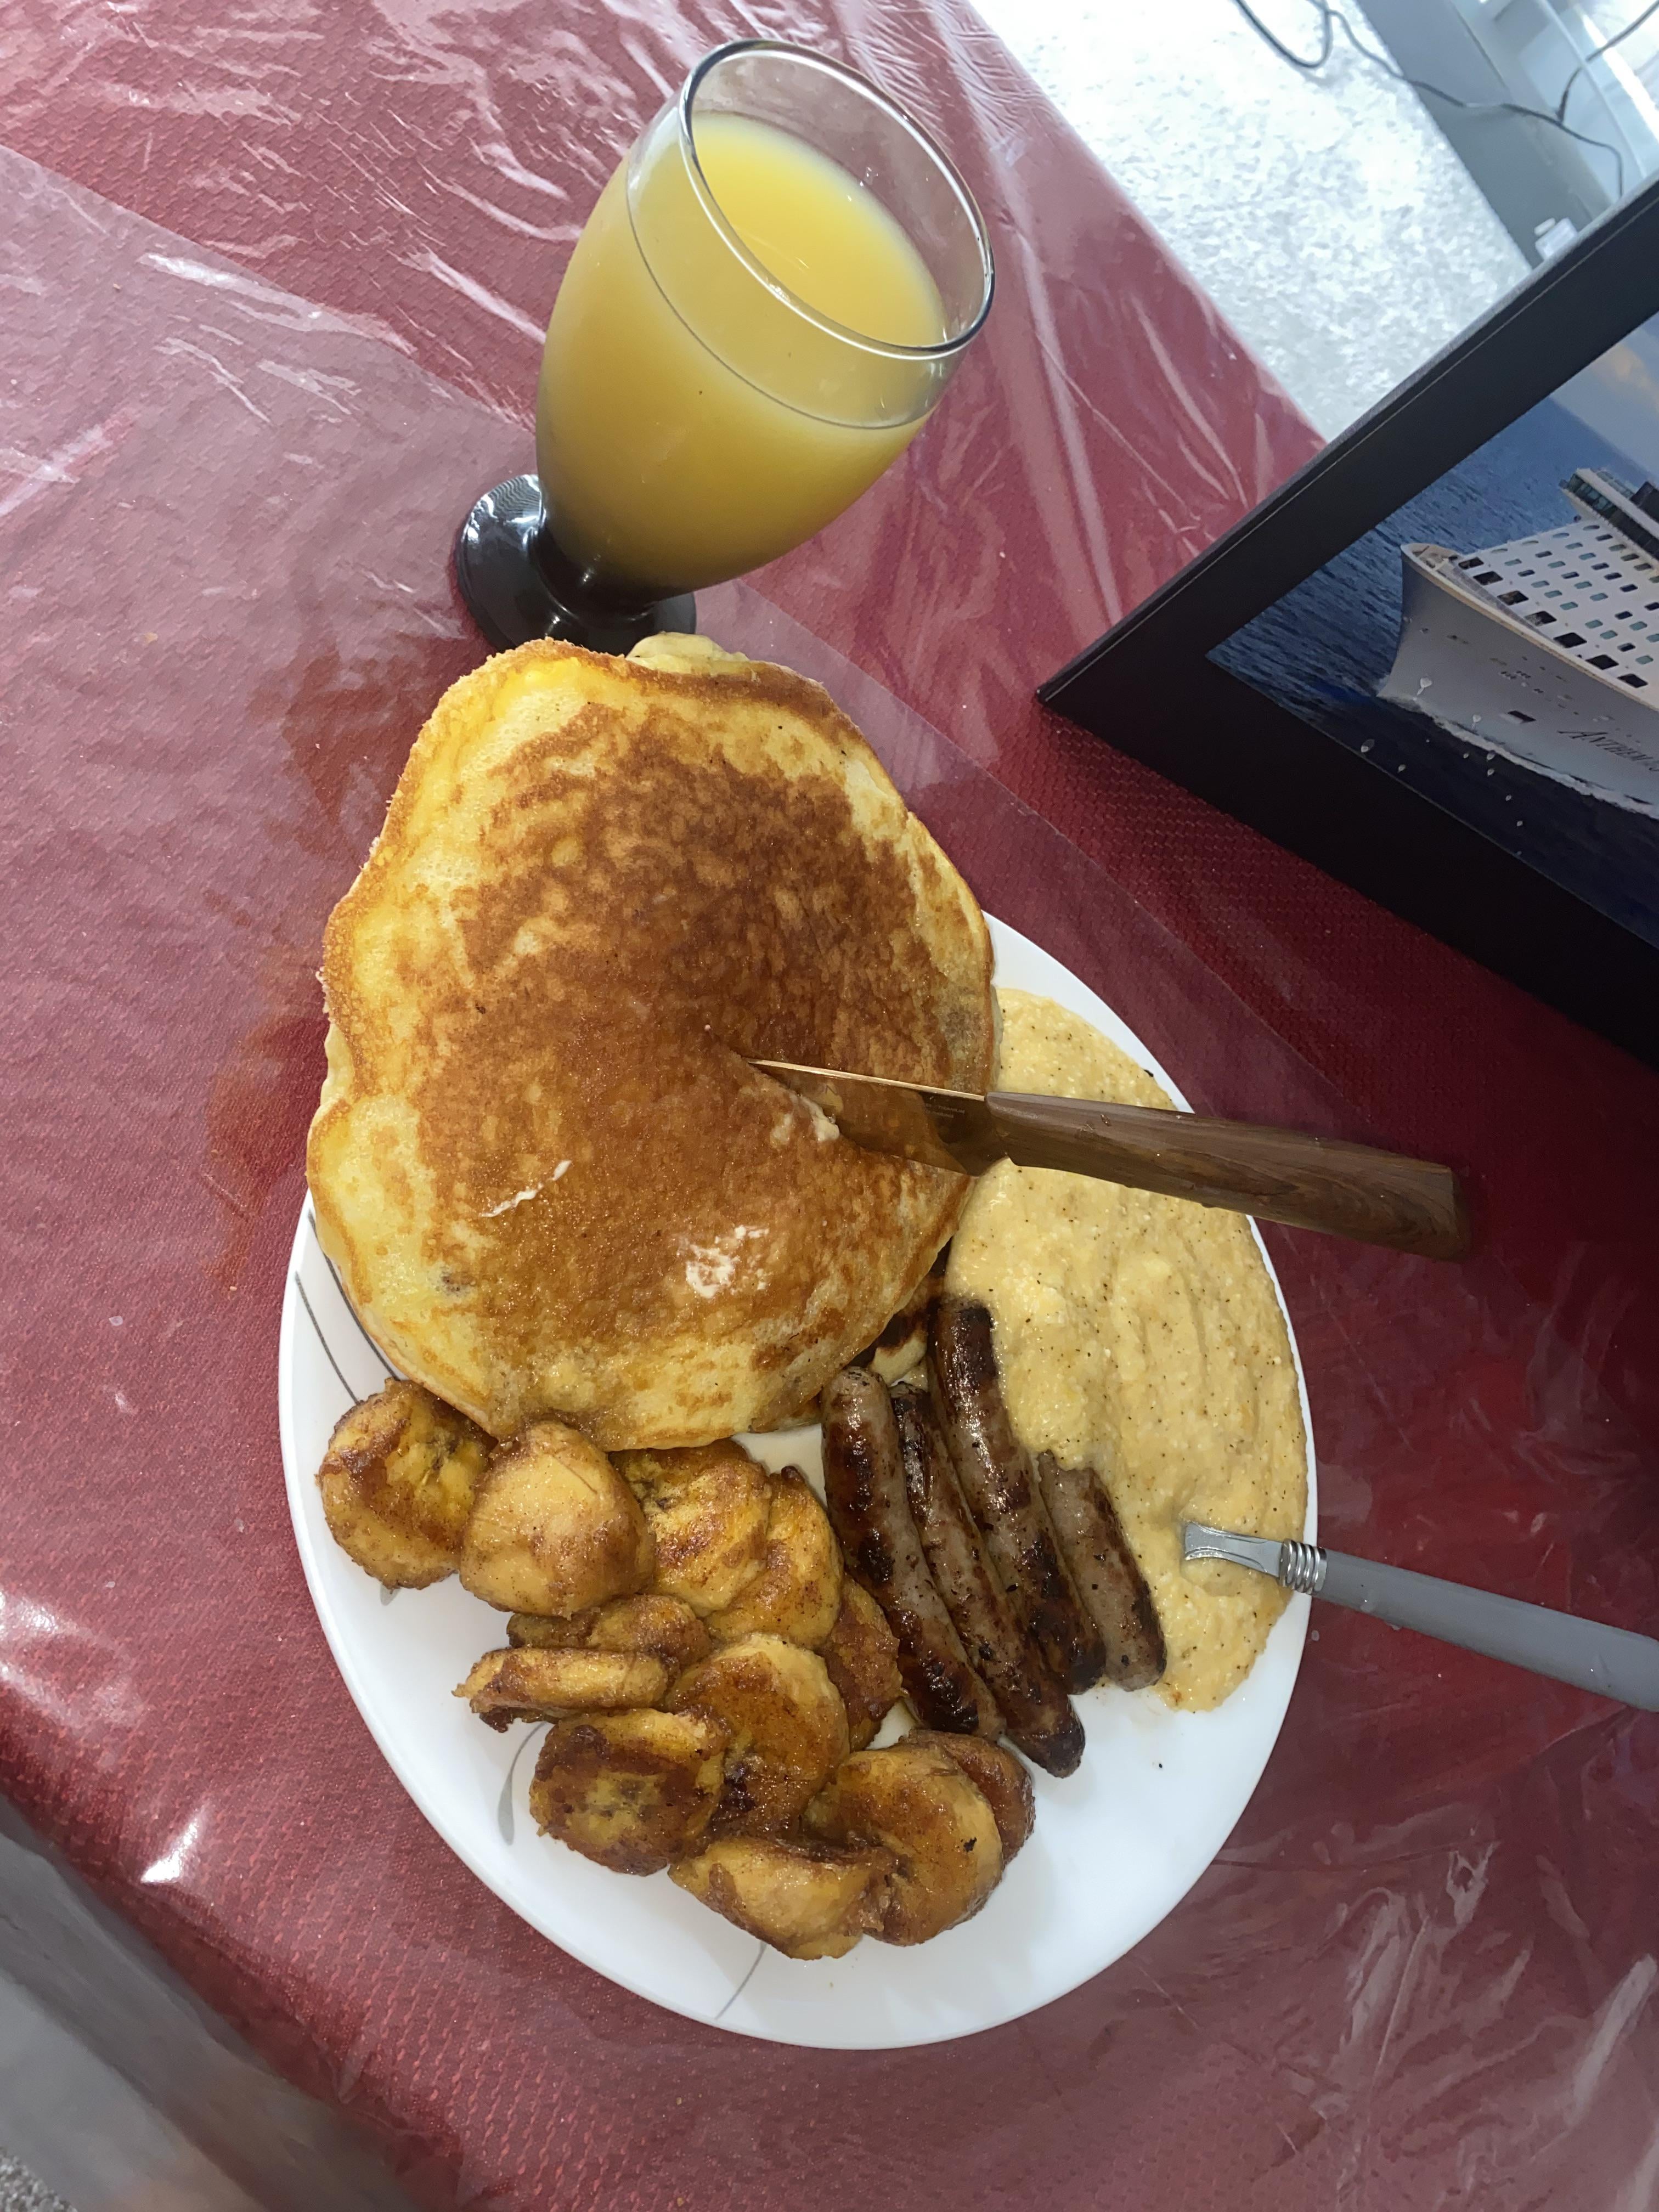 Pancakes sausage cheese grits plantains orange juice - Dining and Cooking